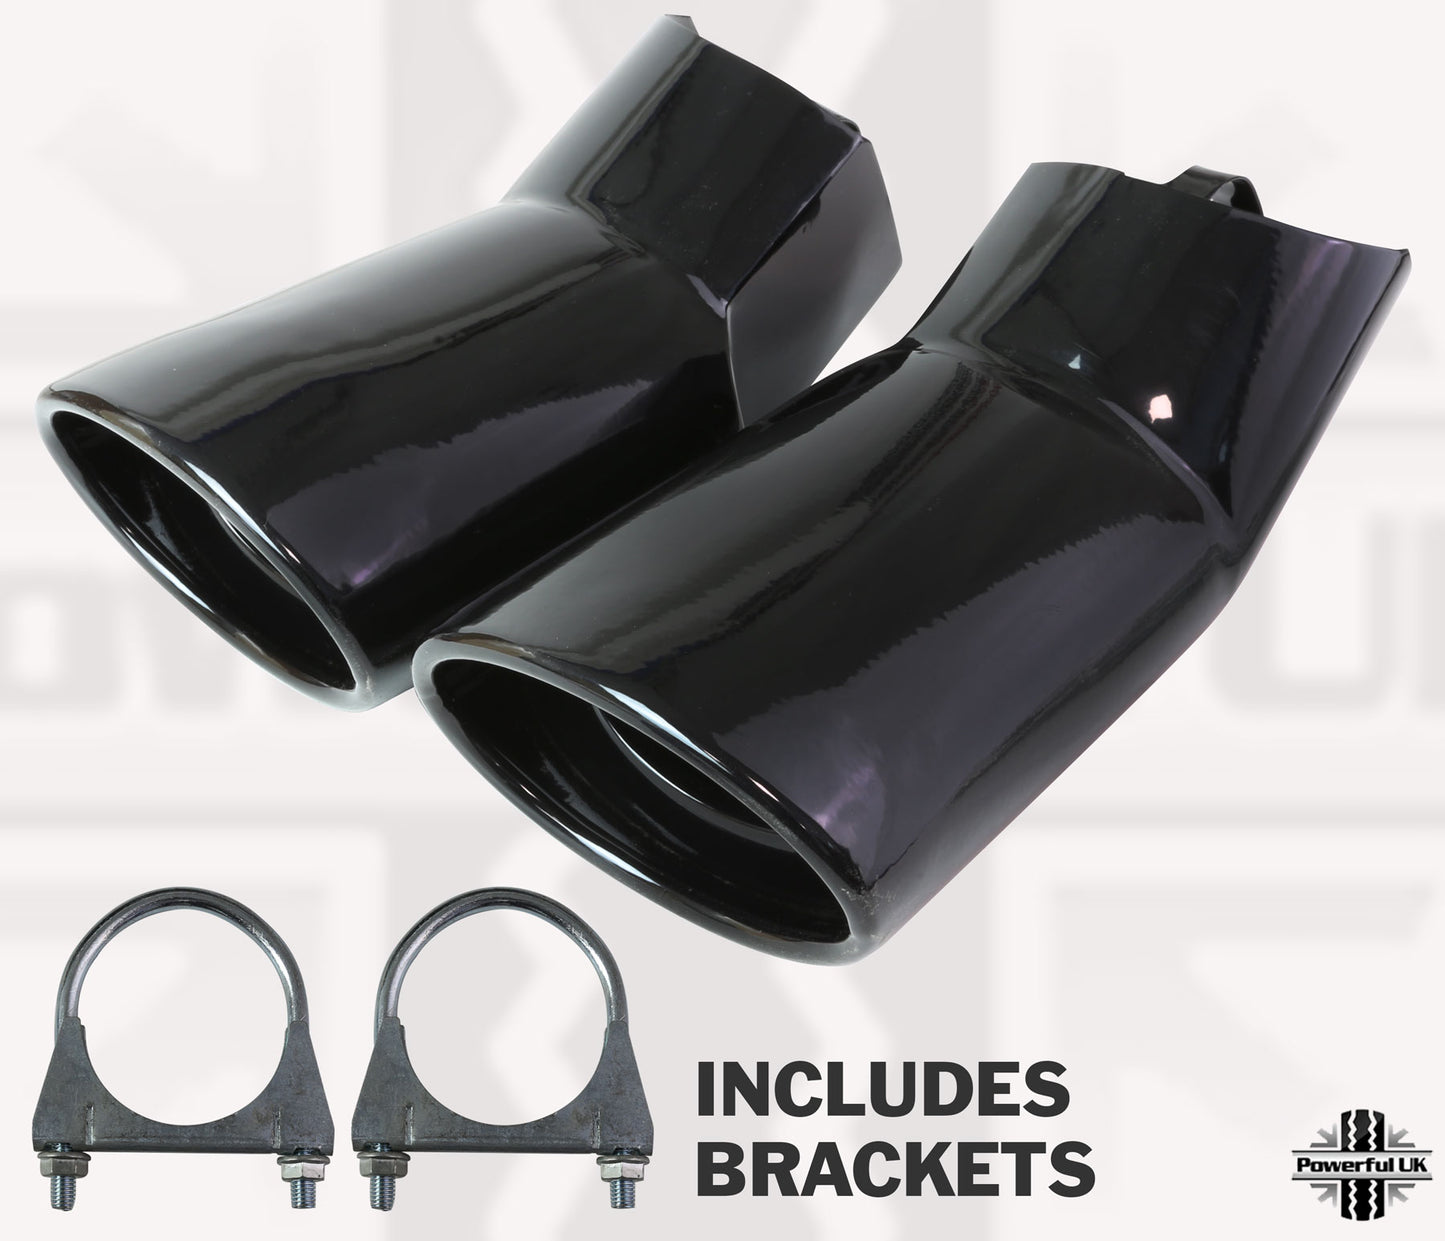 Twin Exhaust Tailpipes for Range Rover Sport L320 - Diesel Models - Black